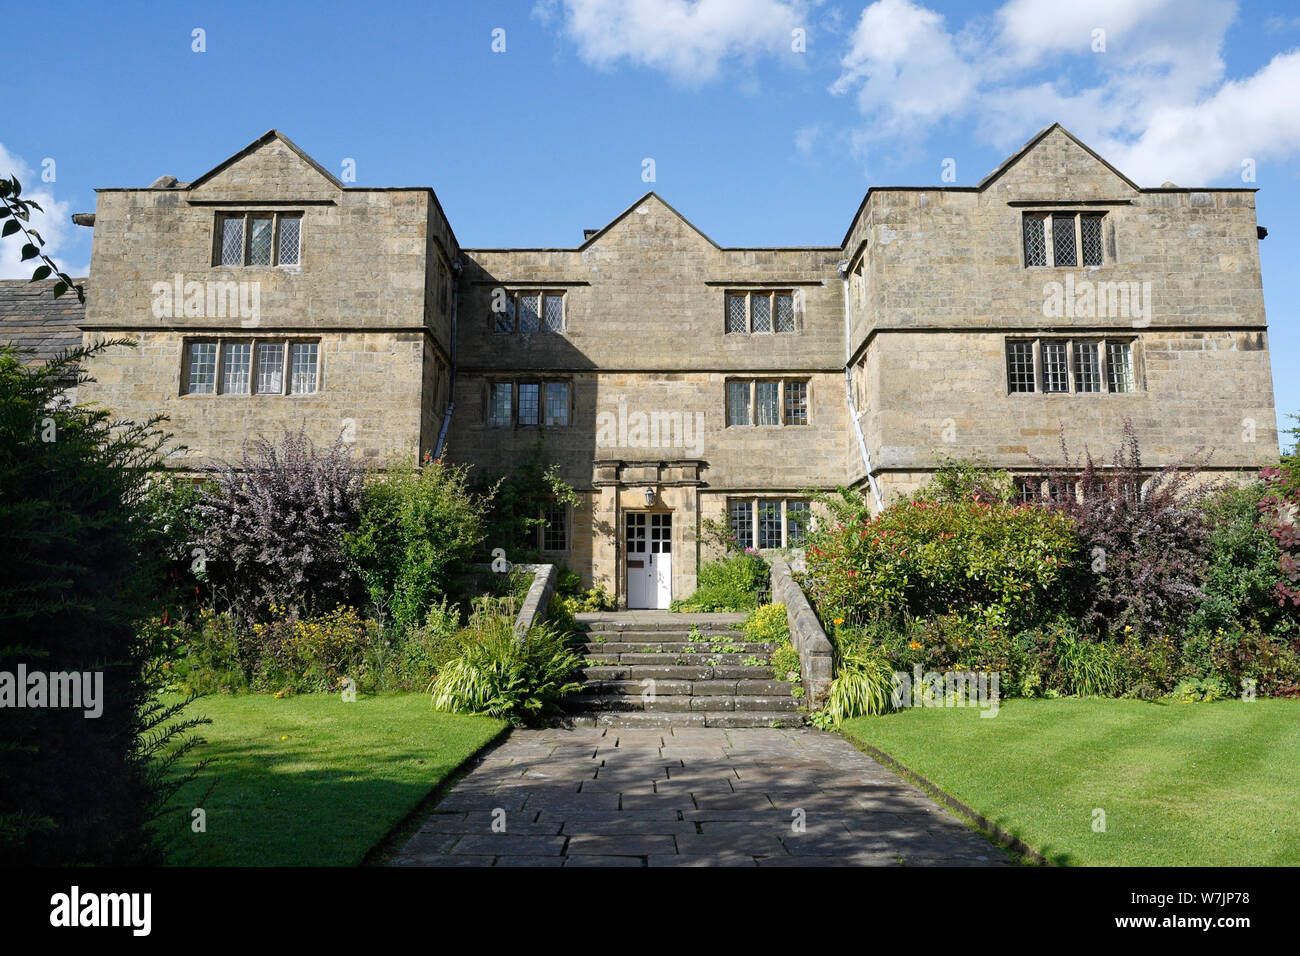 Eyam Hall in Derbyshire England UK, Historic English manor house. Grade II* listed building in the Peak District National Park, Jacobean period Stock Photo